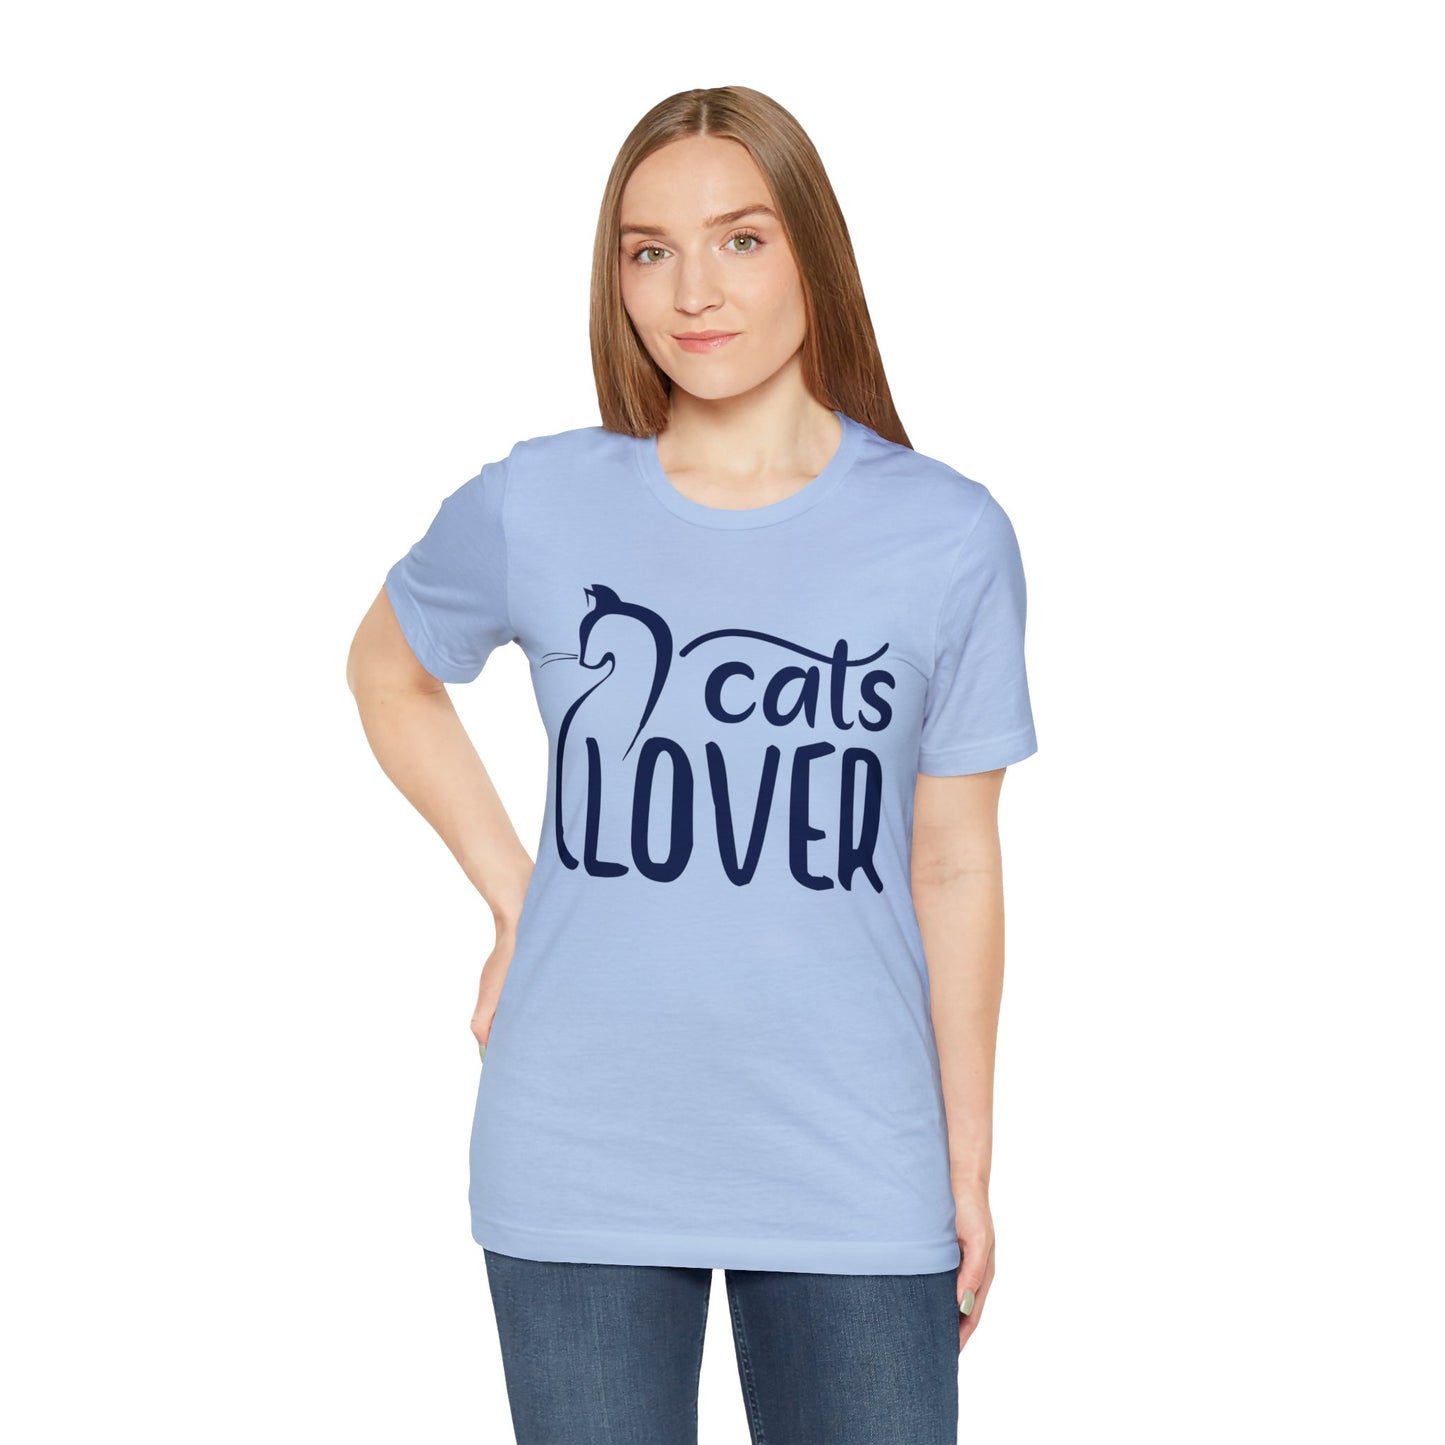 Cats Lover Collection - Trendy Cat T-Shirts for Feline Enthusiasts!